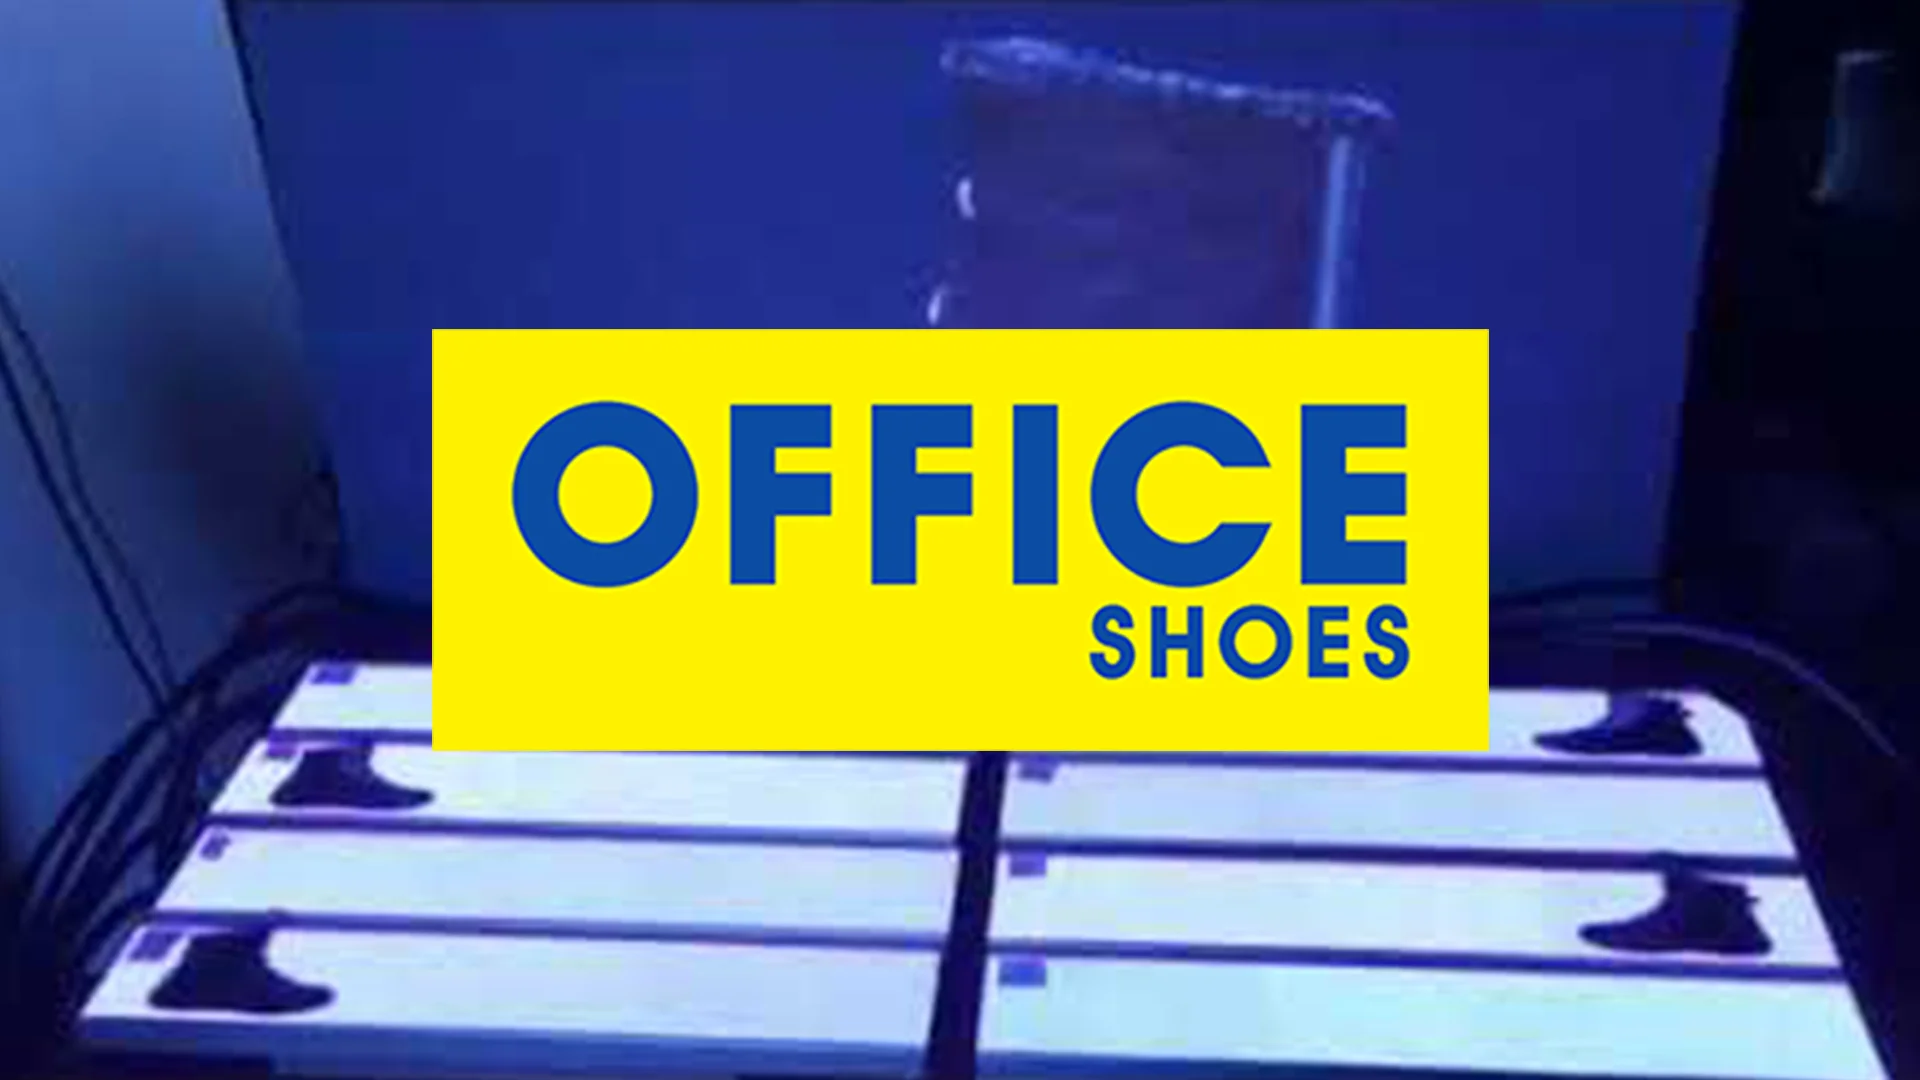 Office Shoes – Animation and 3D models for Smart Shelf Technology